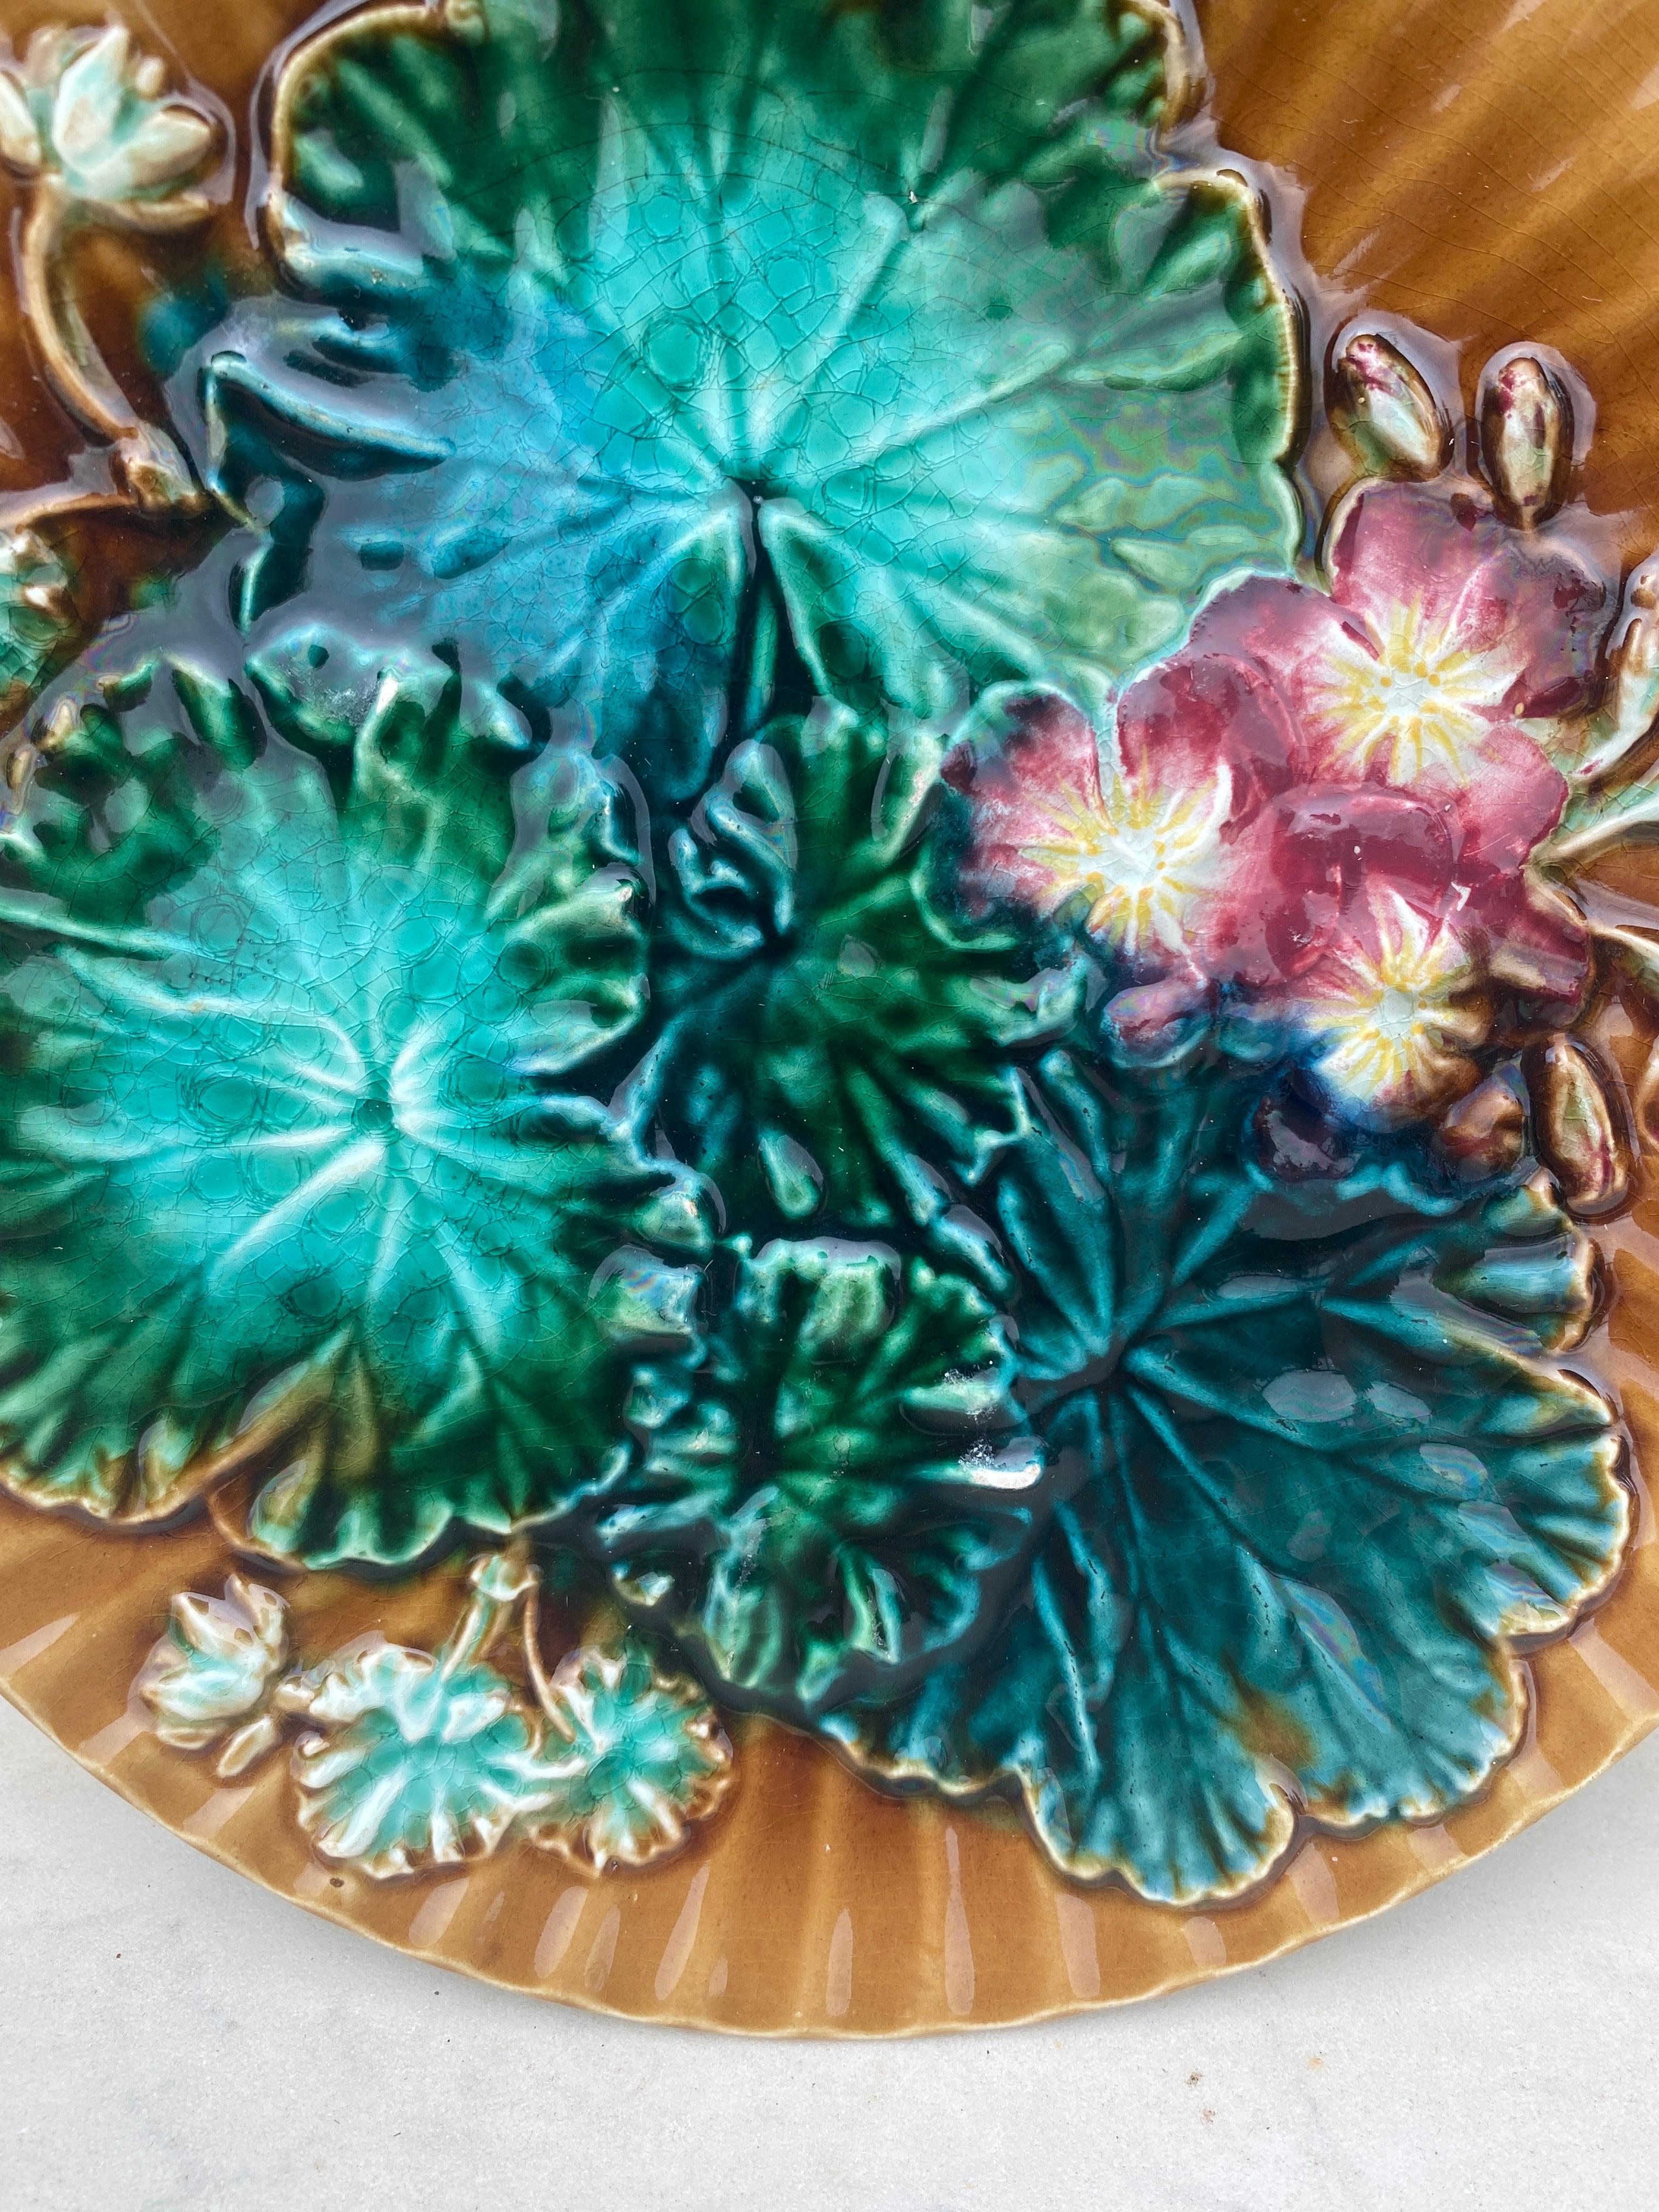 Majolica leaves & flowers plate Clairefontaine, circa 1890.